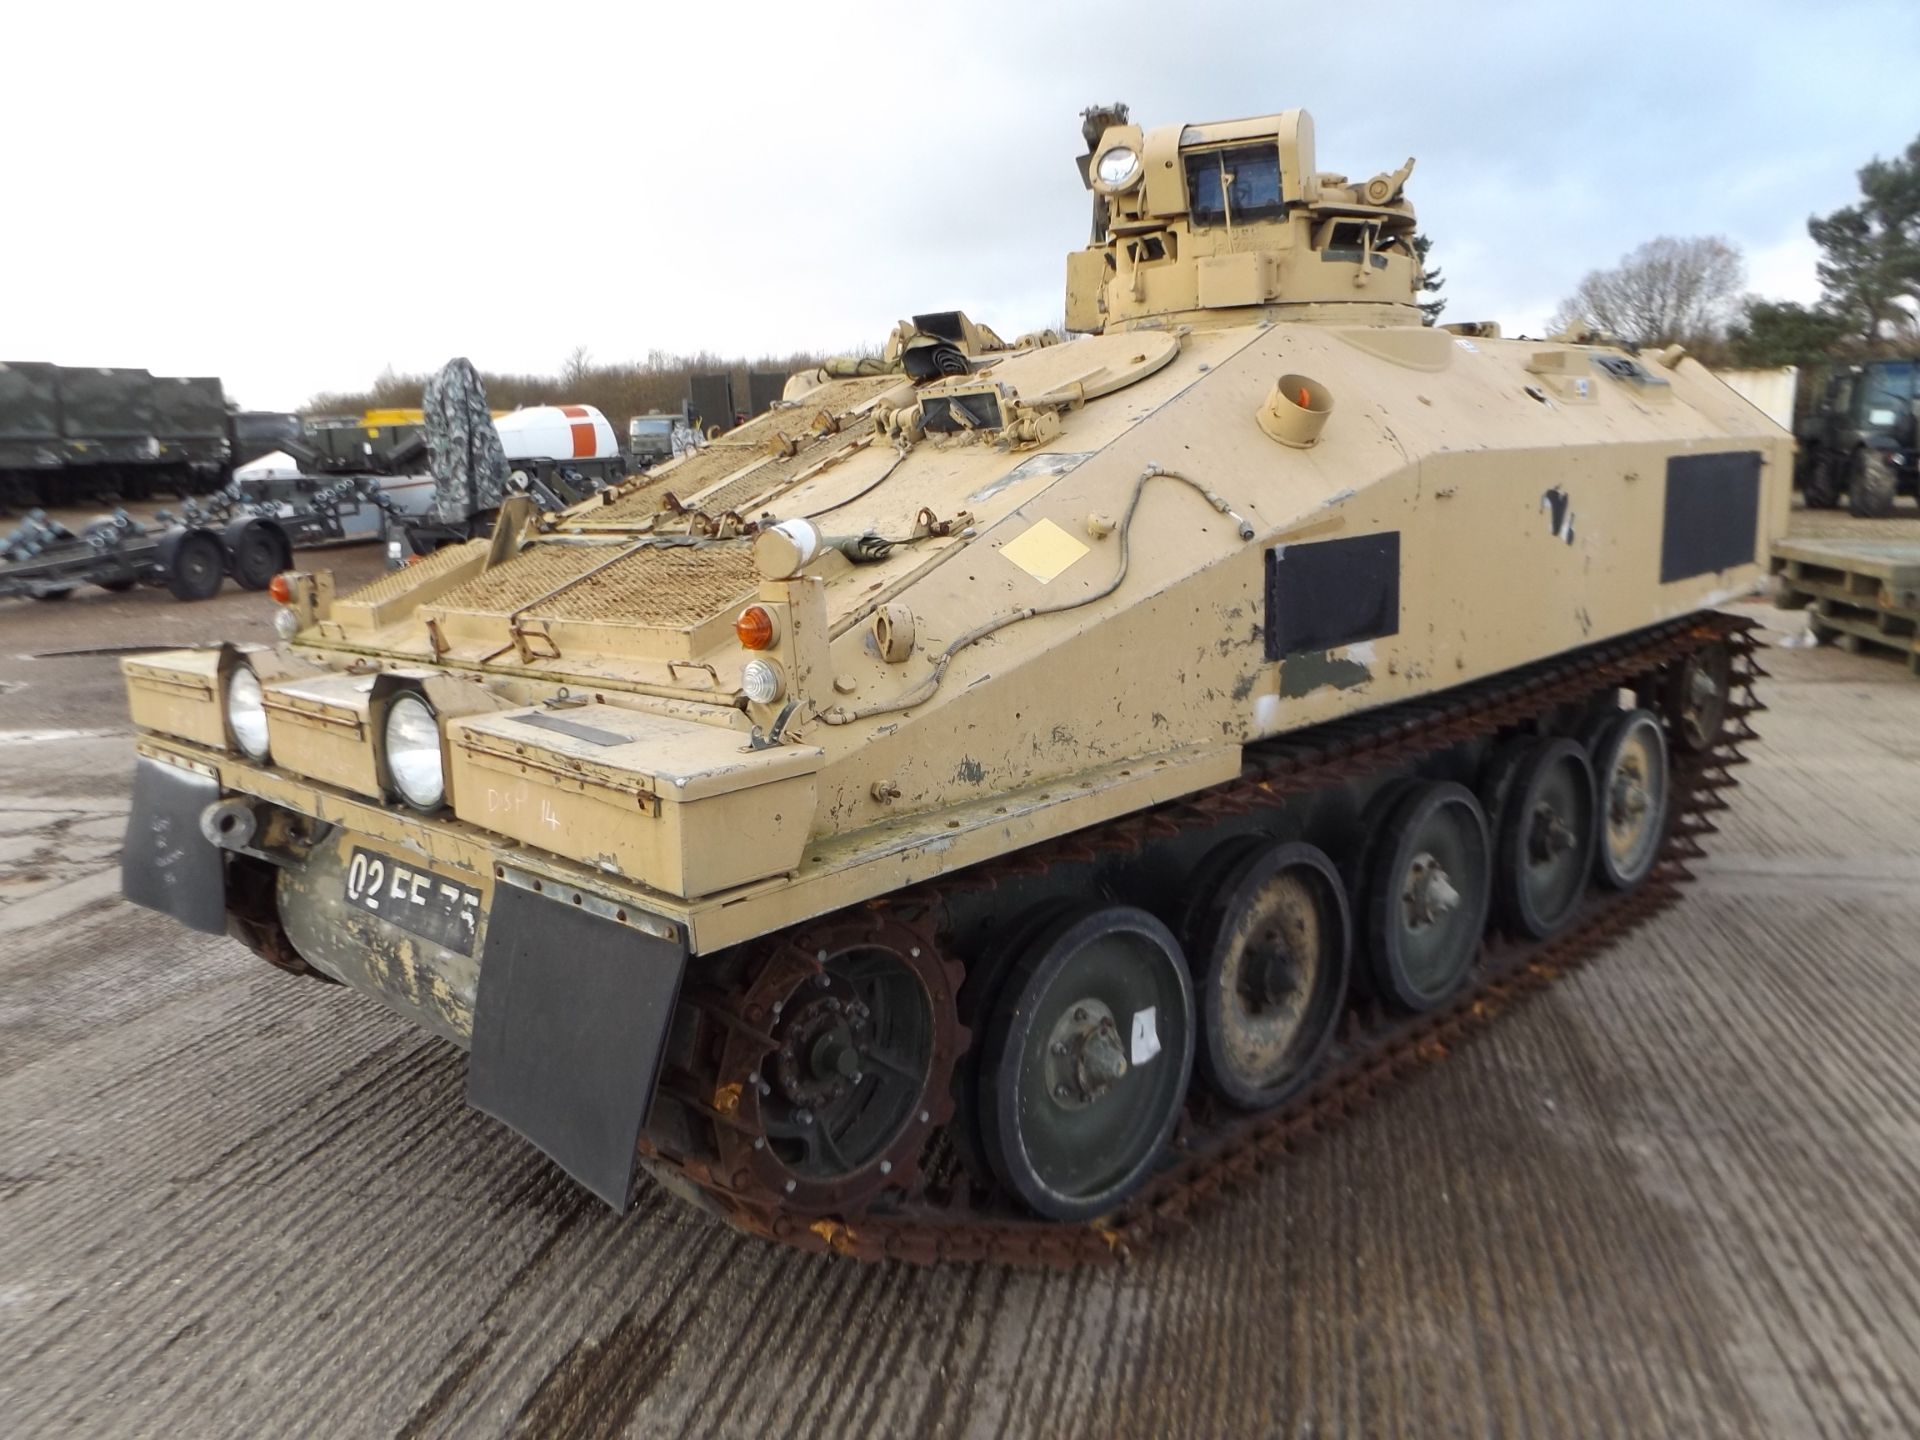 Dieselised CVRT (Combat Vehicle Reconnaissance Tracked) Spartan Armoured Personnel Carrier - Image 3 of 21